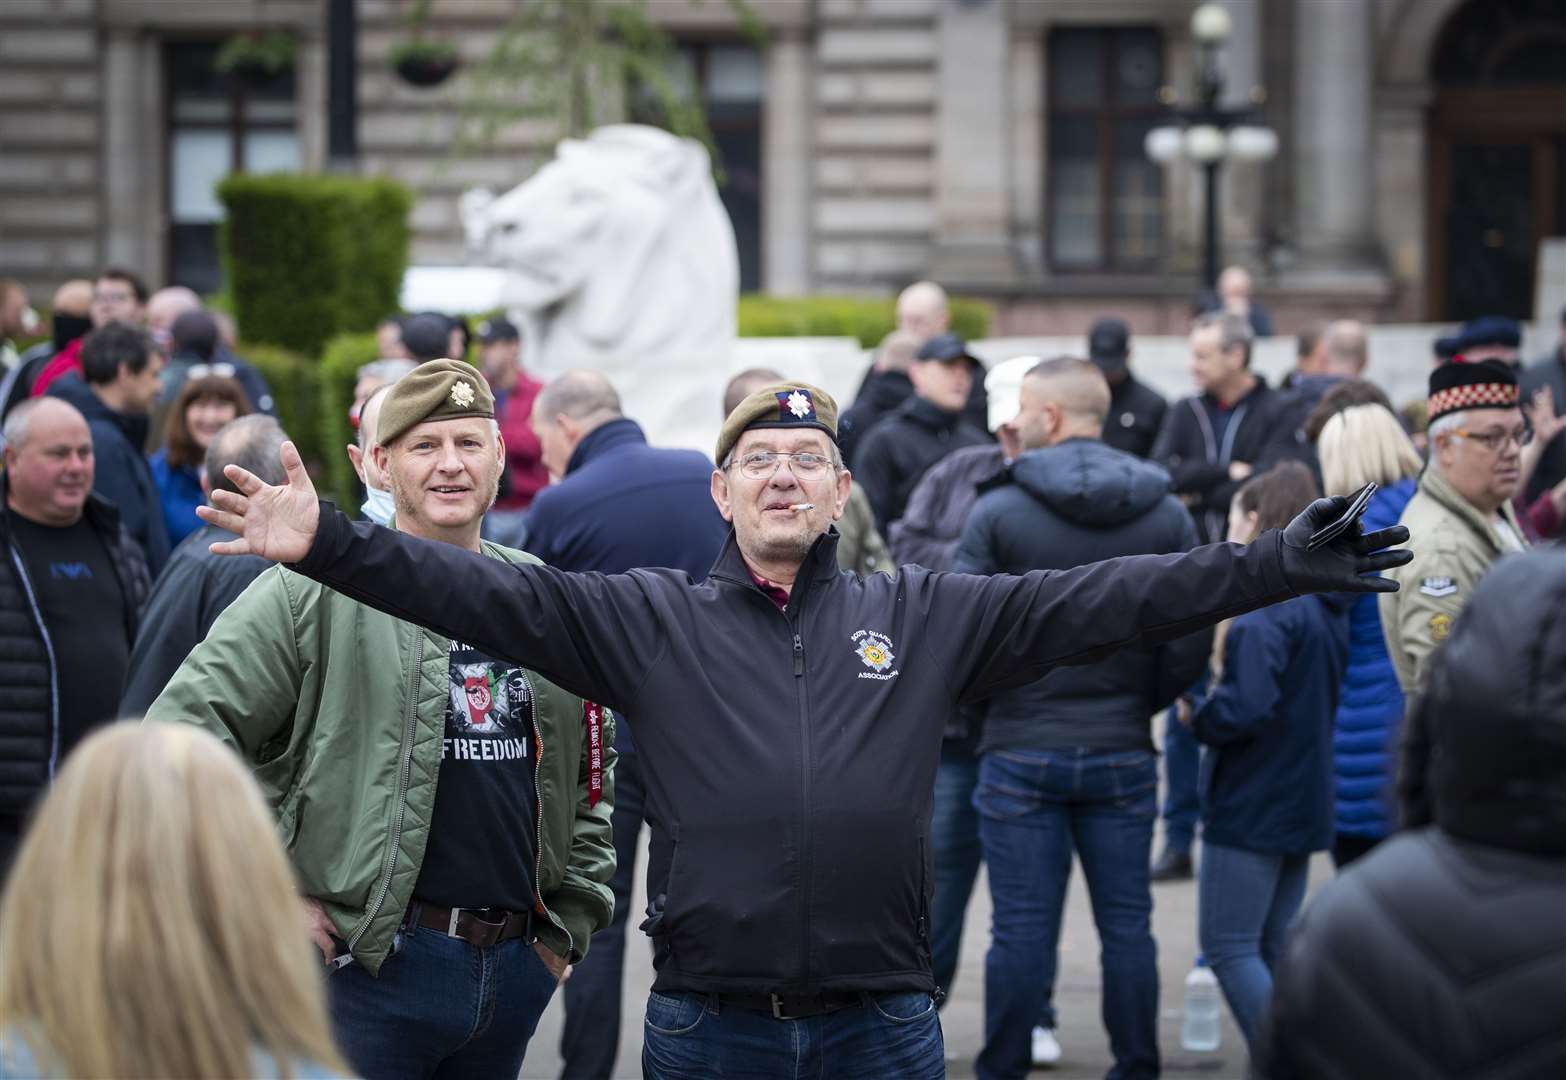 Activists gathered at the Cenotaph in George Square, Glasgow (Jane Barlow/PA)